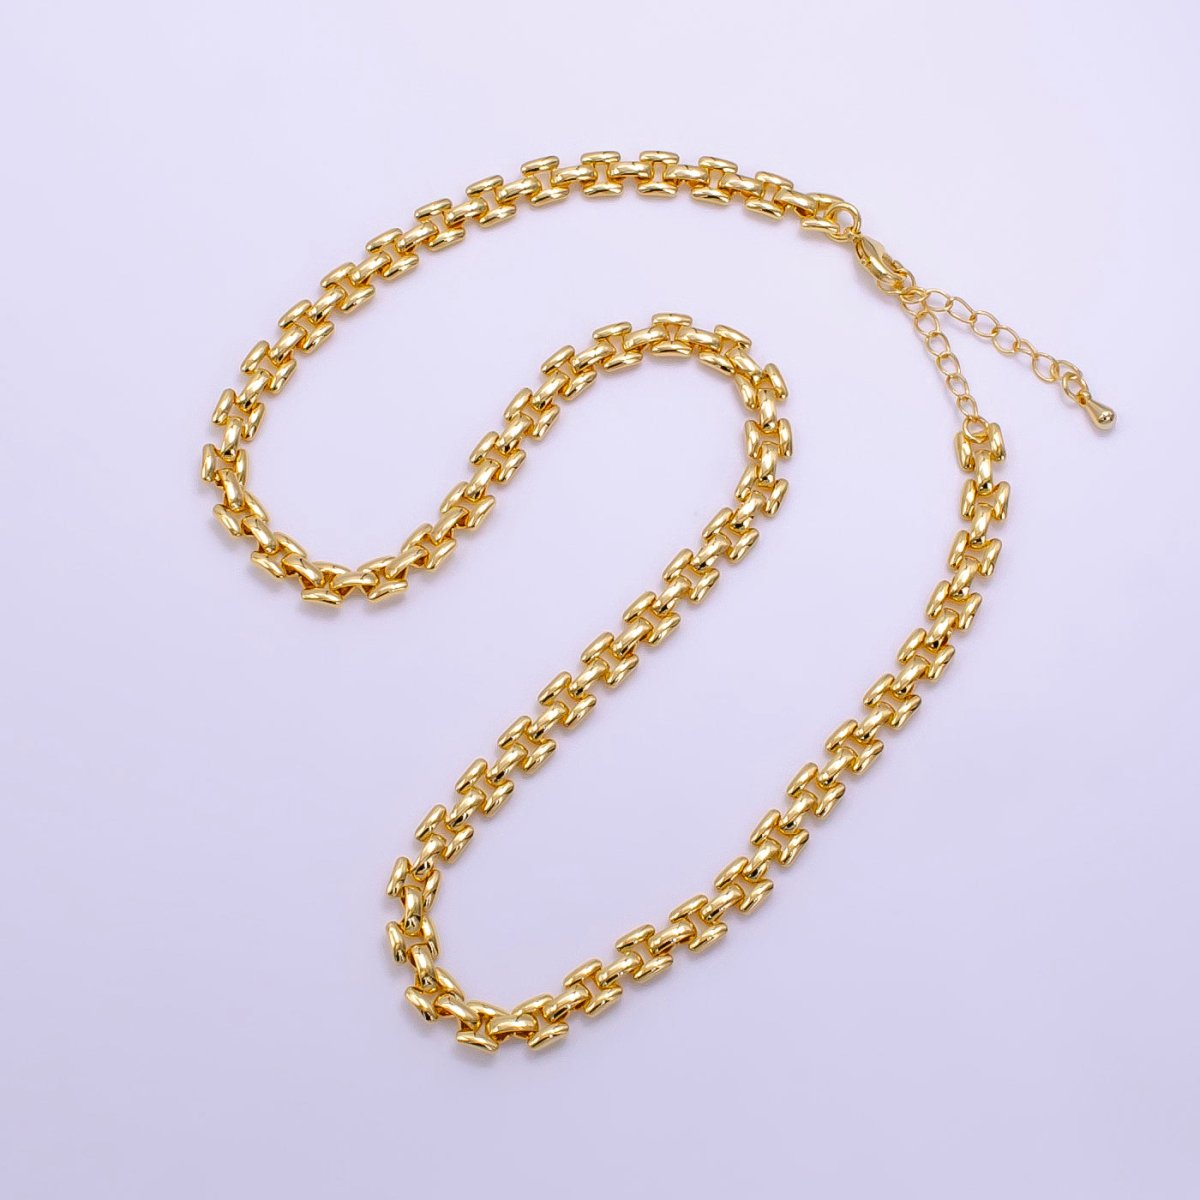 14K Gold Filled 5.5mm Panther Chain 16 Inch Choker Necklace w. Extender | WA-2474 - DLUXCA